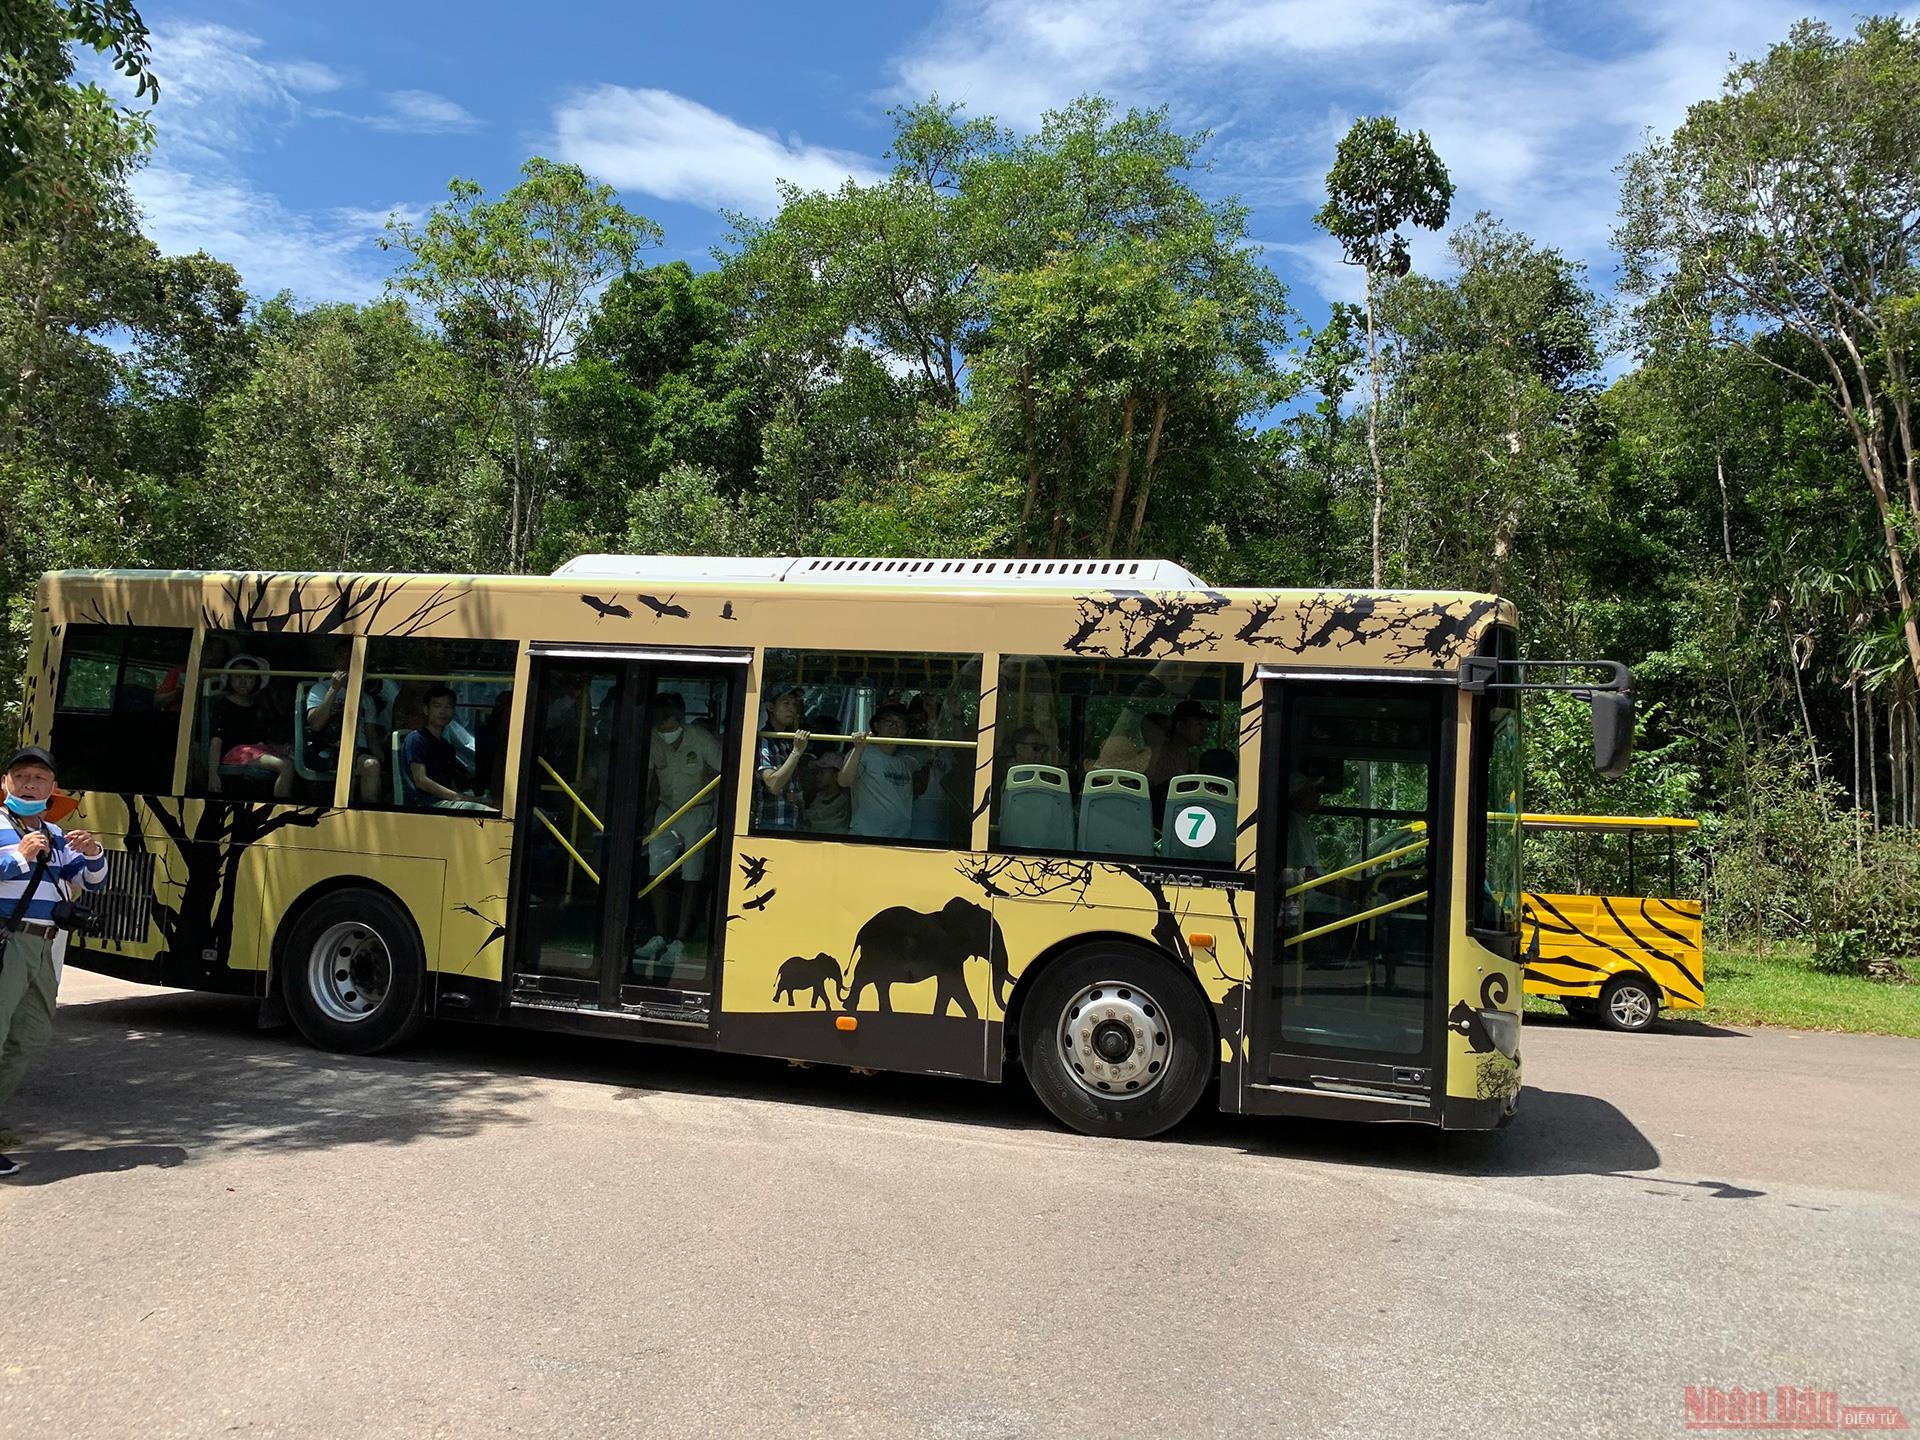 The bus that goes around the zoo where wild animals can freely-roam about